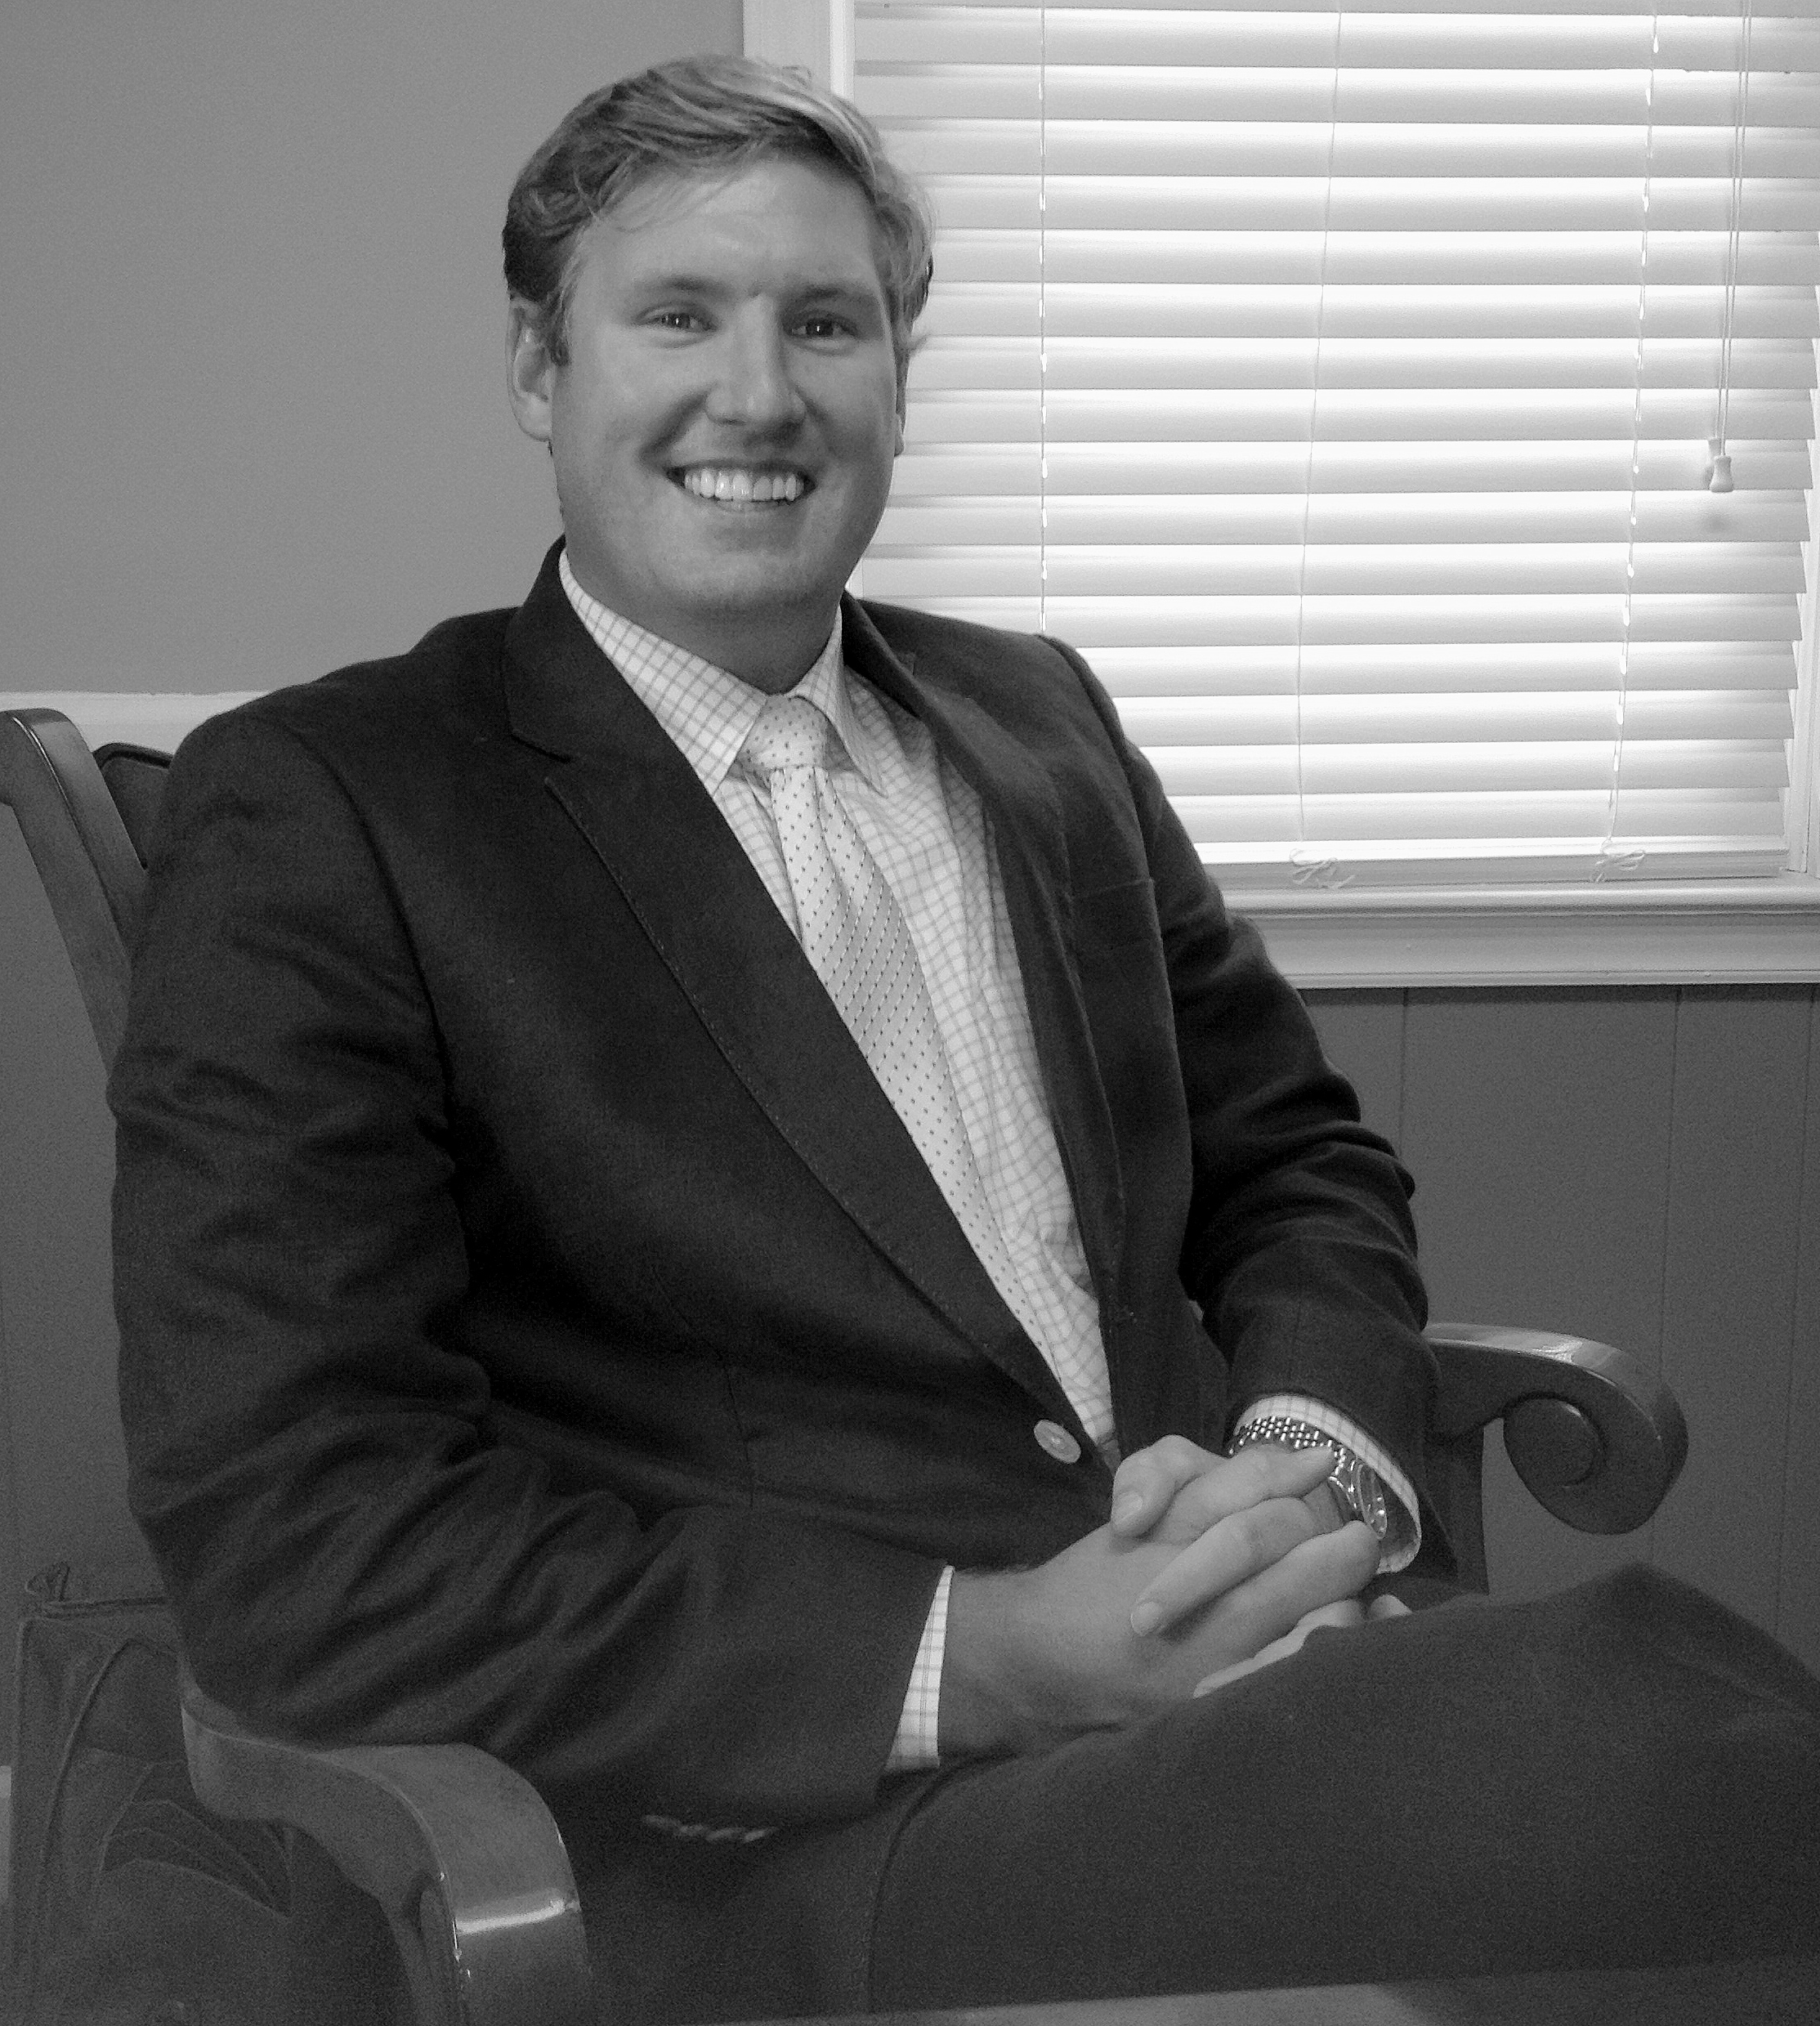 DUI Attorney Aaron J Angell - Anderson County, SC - DUIAttorney.com